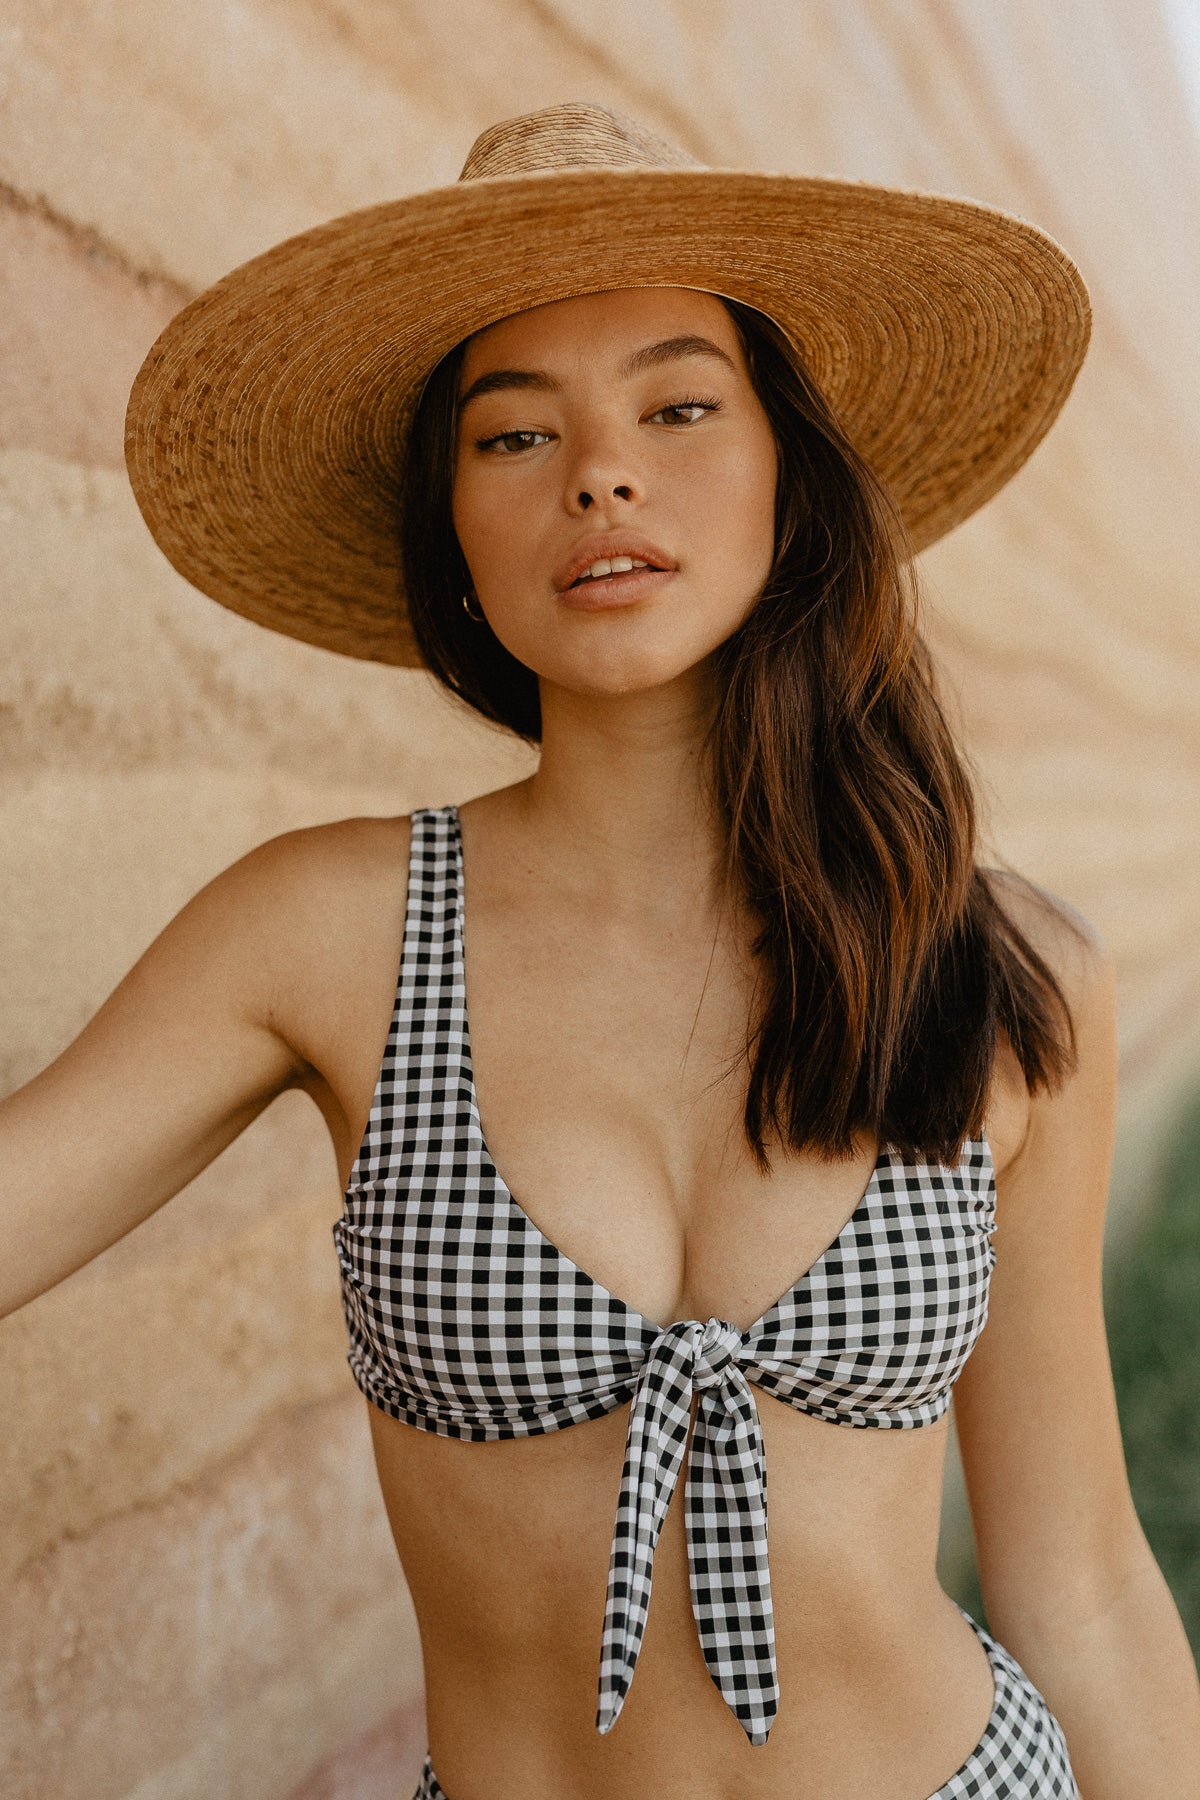 Winnipeg Model Cam Kangas in Canadian swimwear brand Prairie Swim chic black and white gingham adjustable, mix and match, tie-front bikini top with supportive straps for all bust sizes